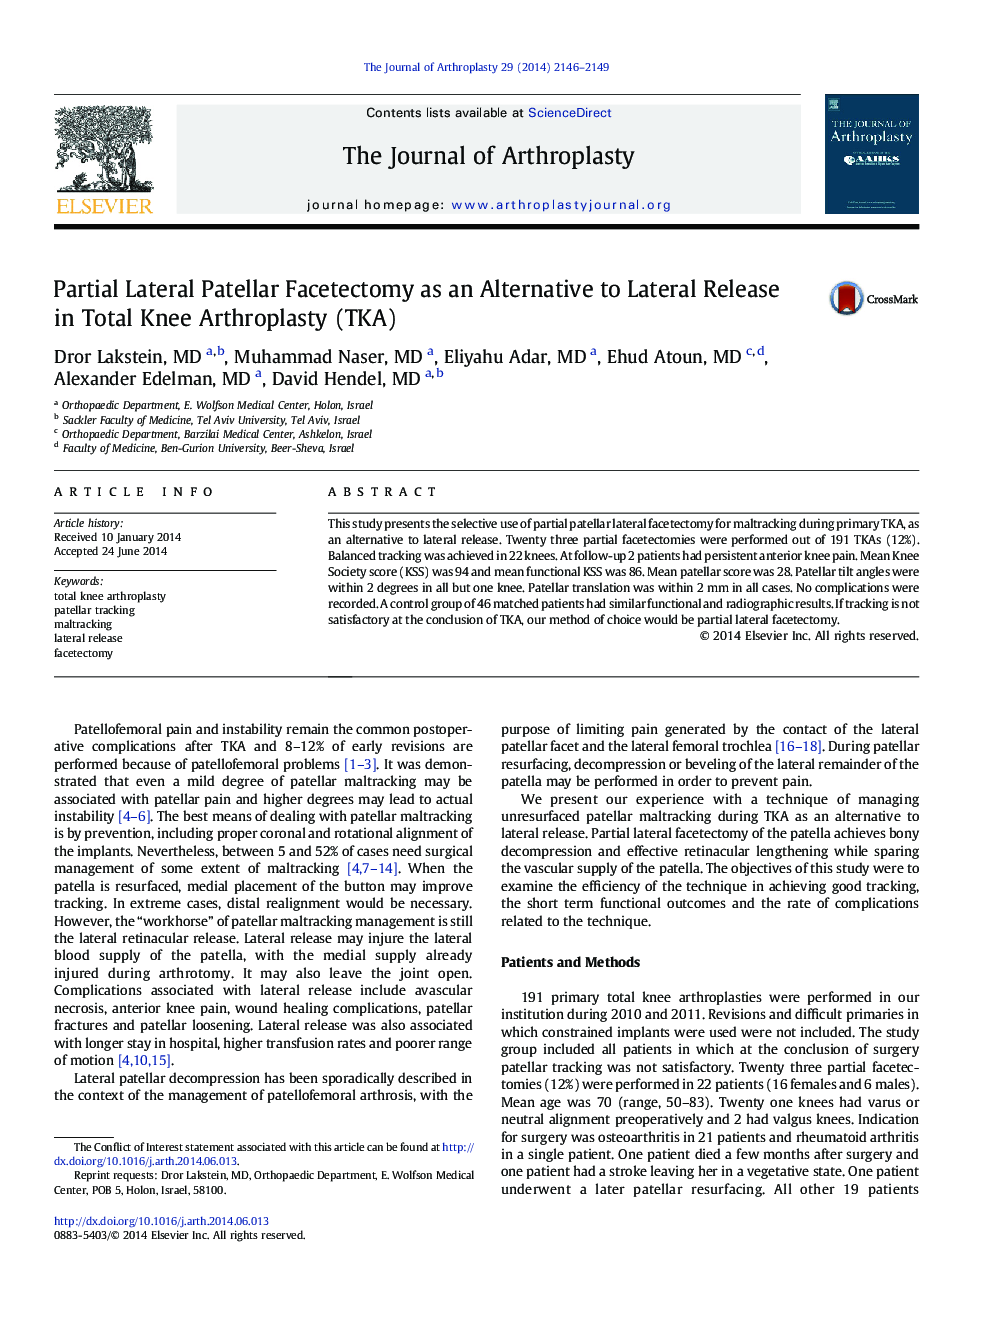 Partial Lateral Patellar Facetectomy as an Alternative to Lateral Release in Total Knee Arthroplasty (TKA) 